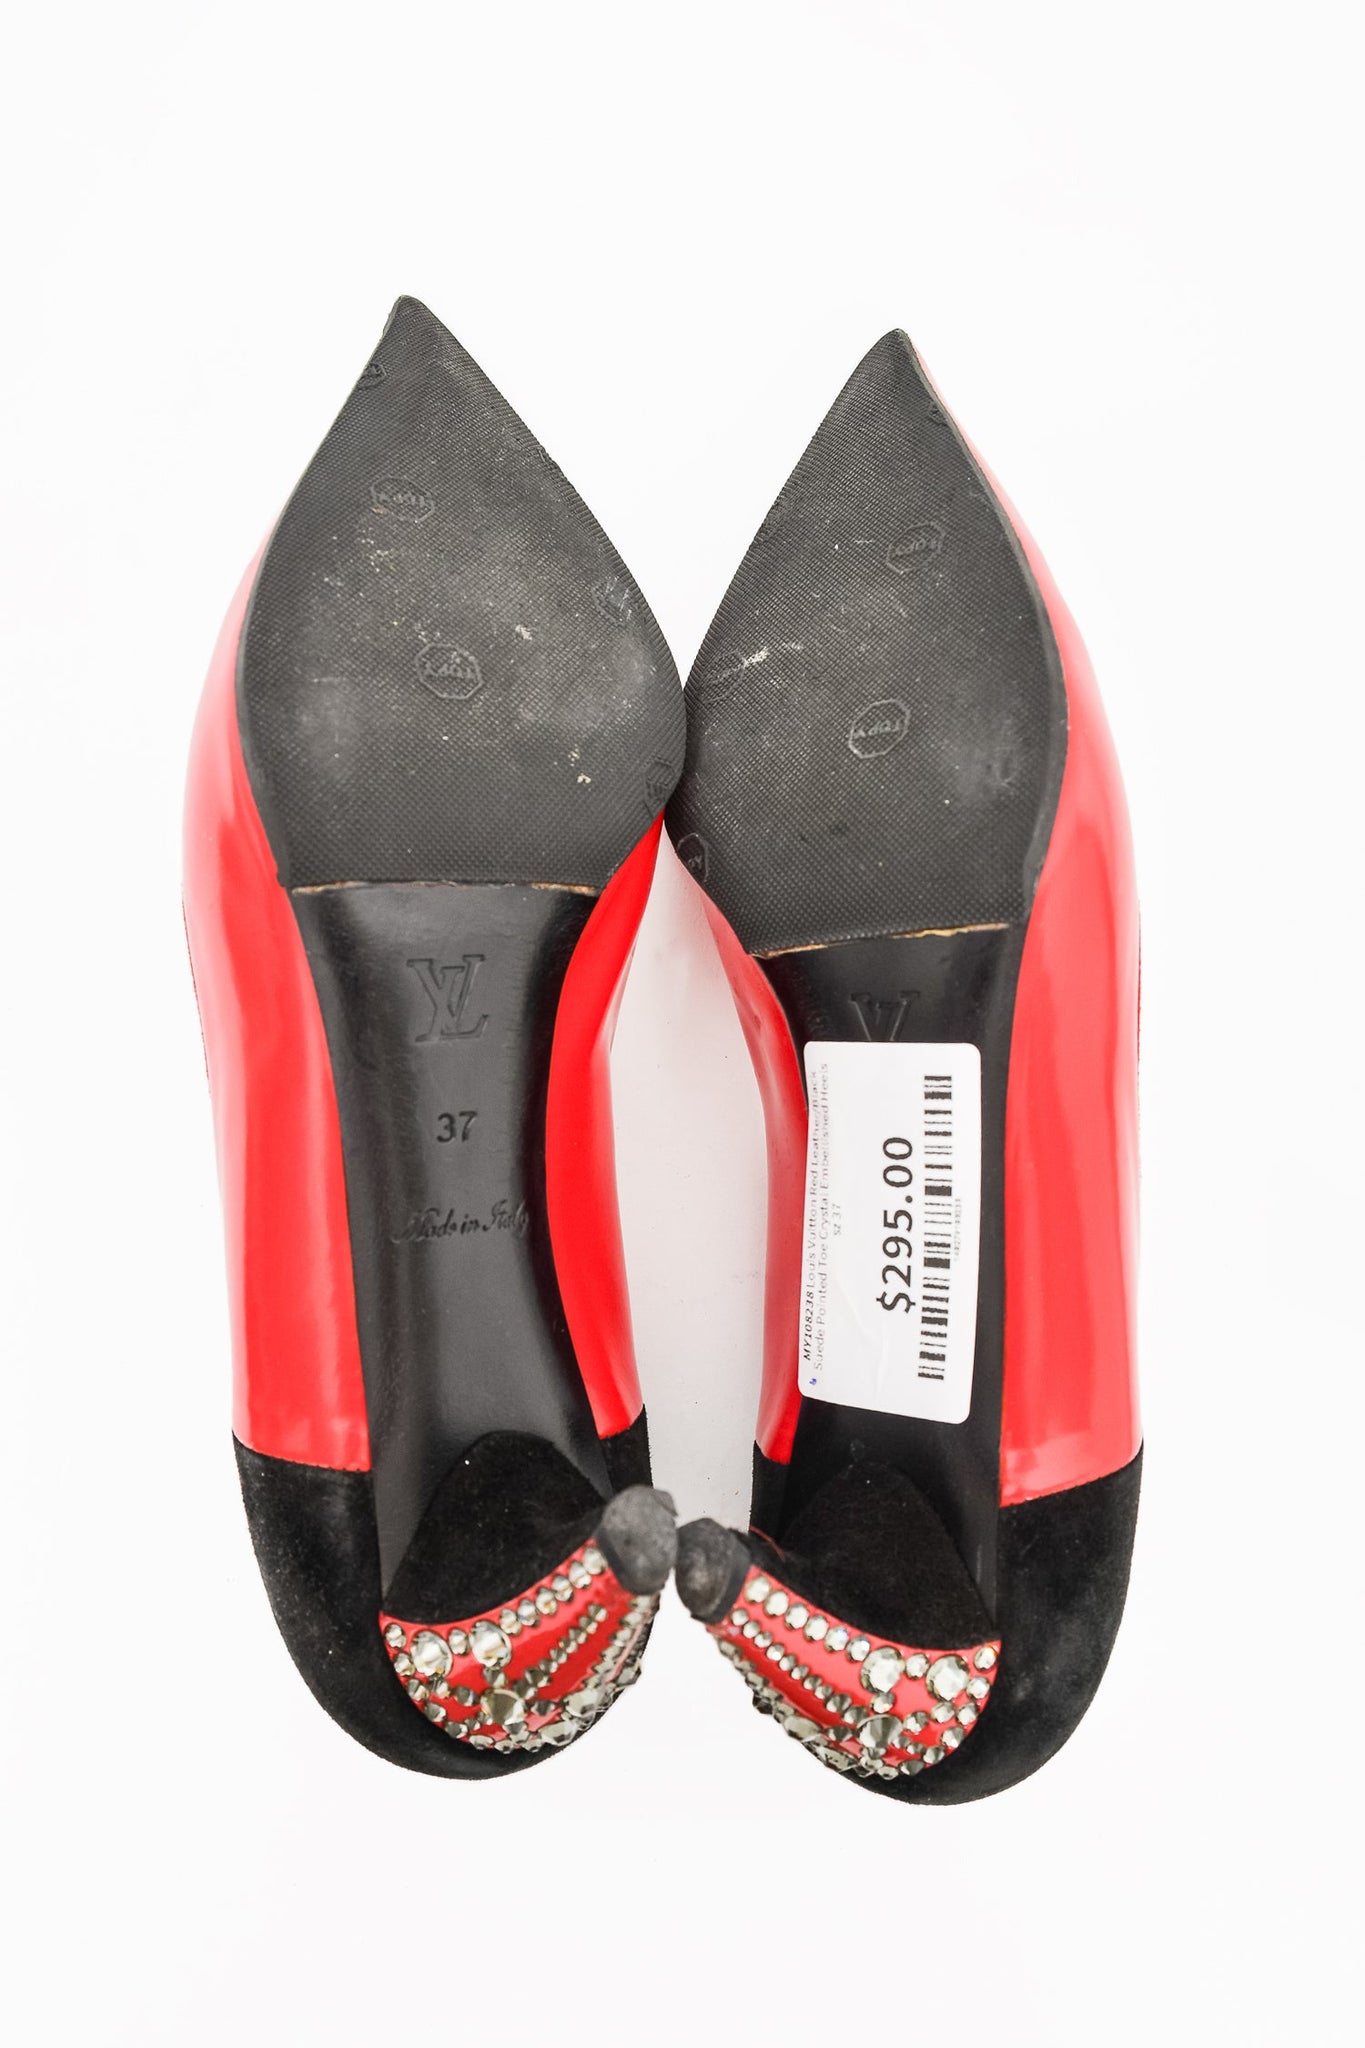 Louis Vuitton Red Leather/Black Suede Pointed Toe Crystal Embellished Heels Size 37